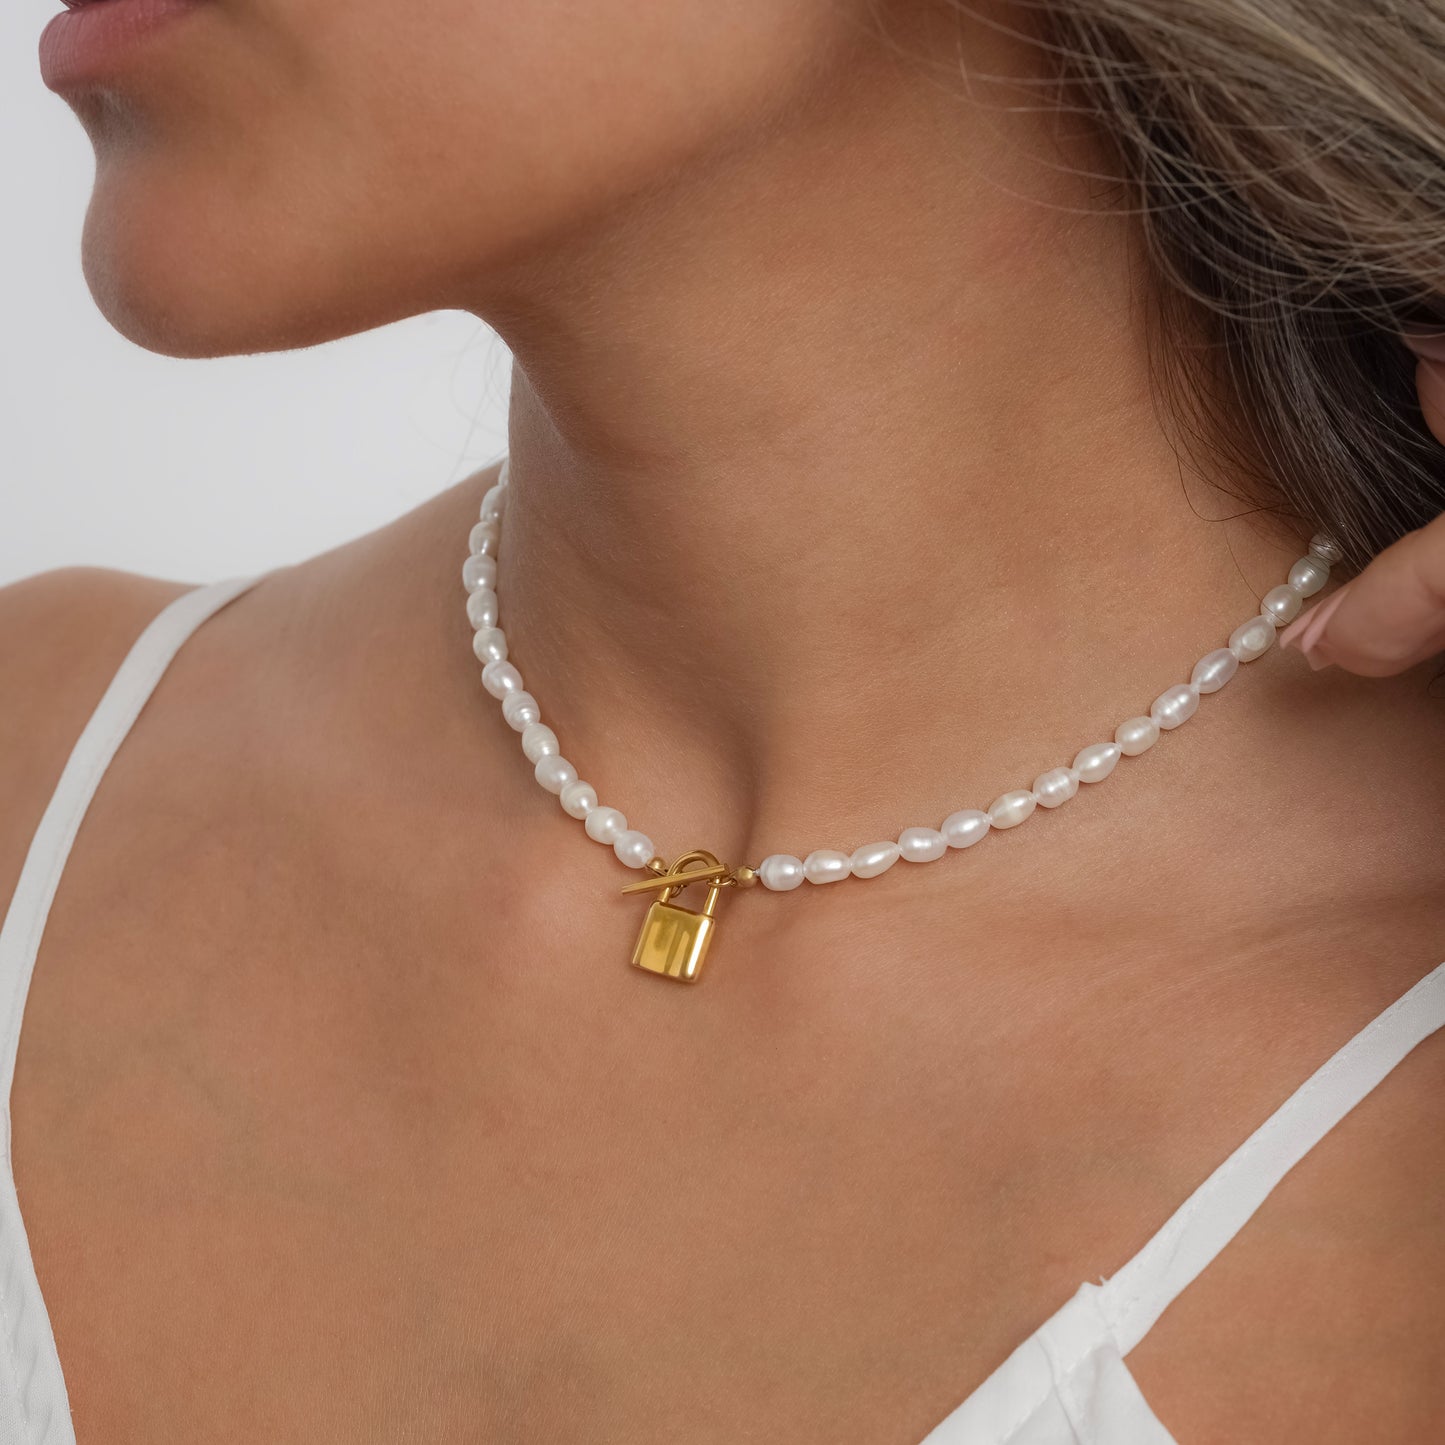 A model in a white dress wearing Padlock Pearl Necklace. Close-up image of the necklace.